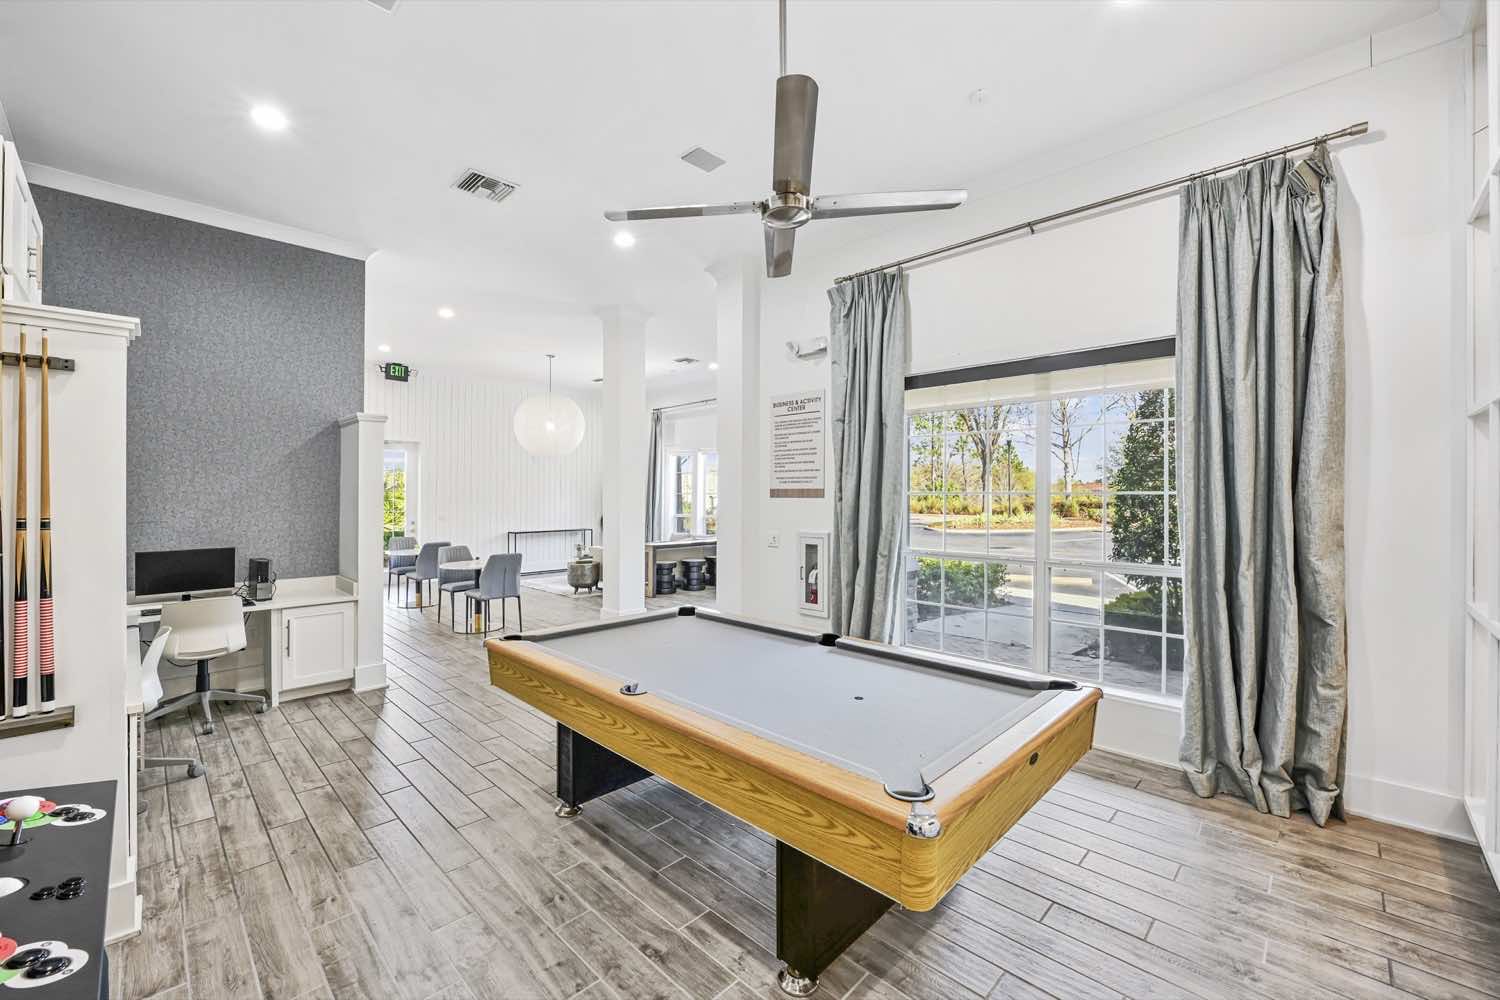 resident activity lounge with billiards table and wood-style flooring